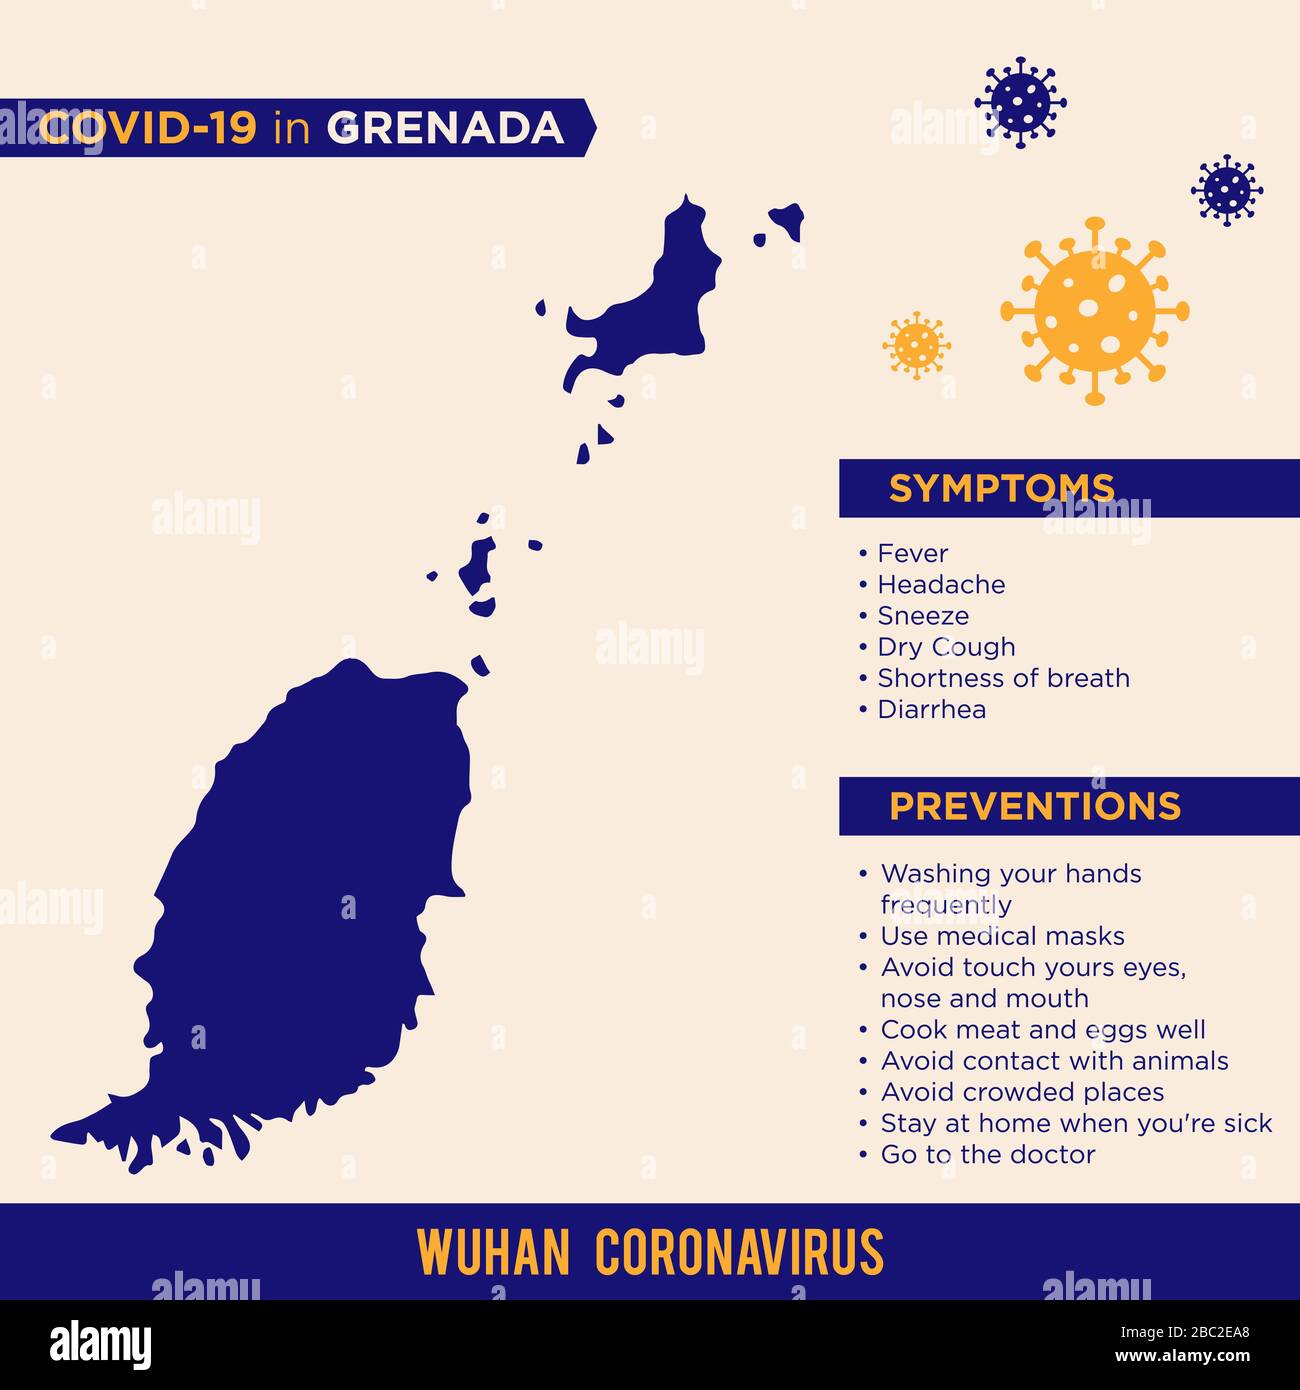 Grenada - American Continent Countries. Covid-29, Corona Virus Map Infographic Vector Template EPS 10. Stock Photo